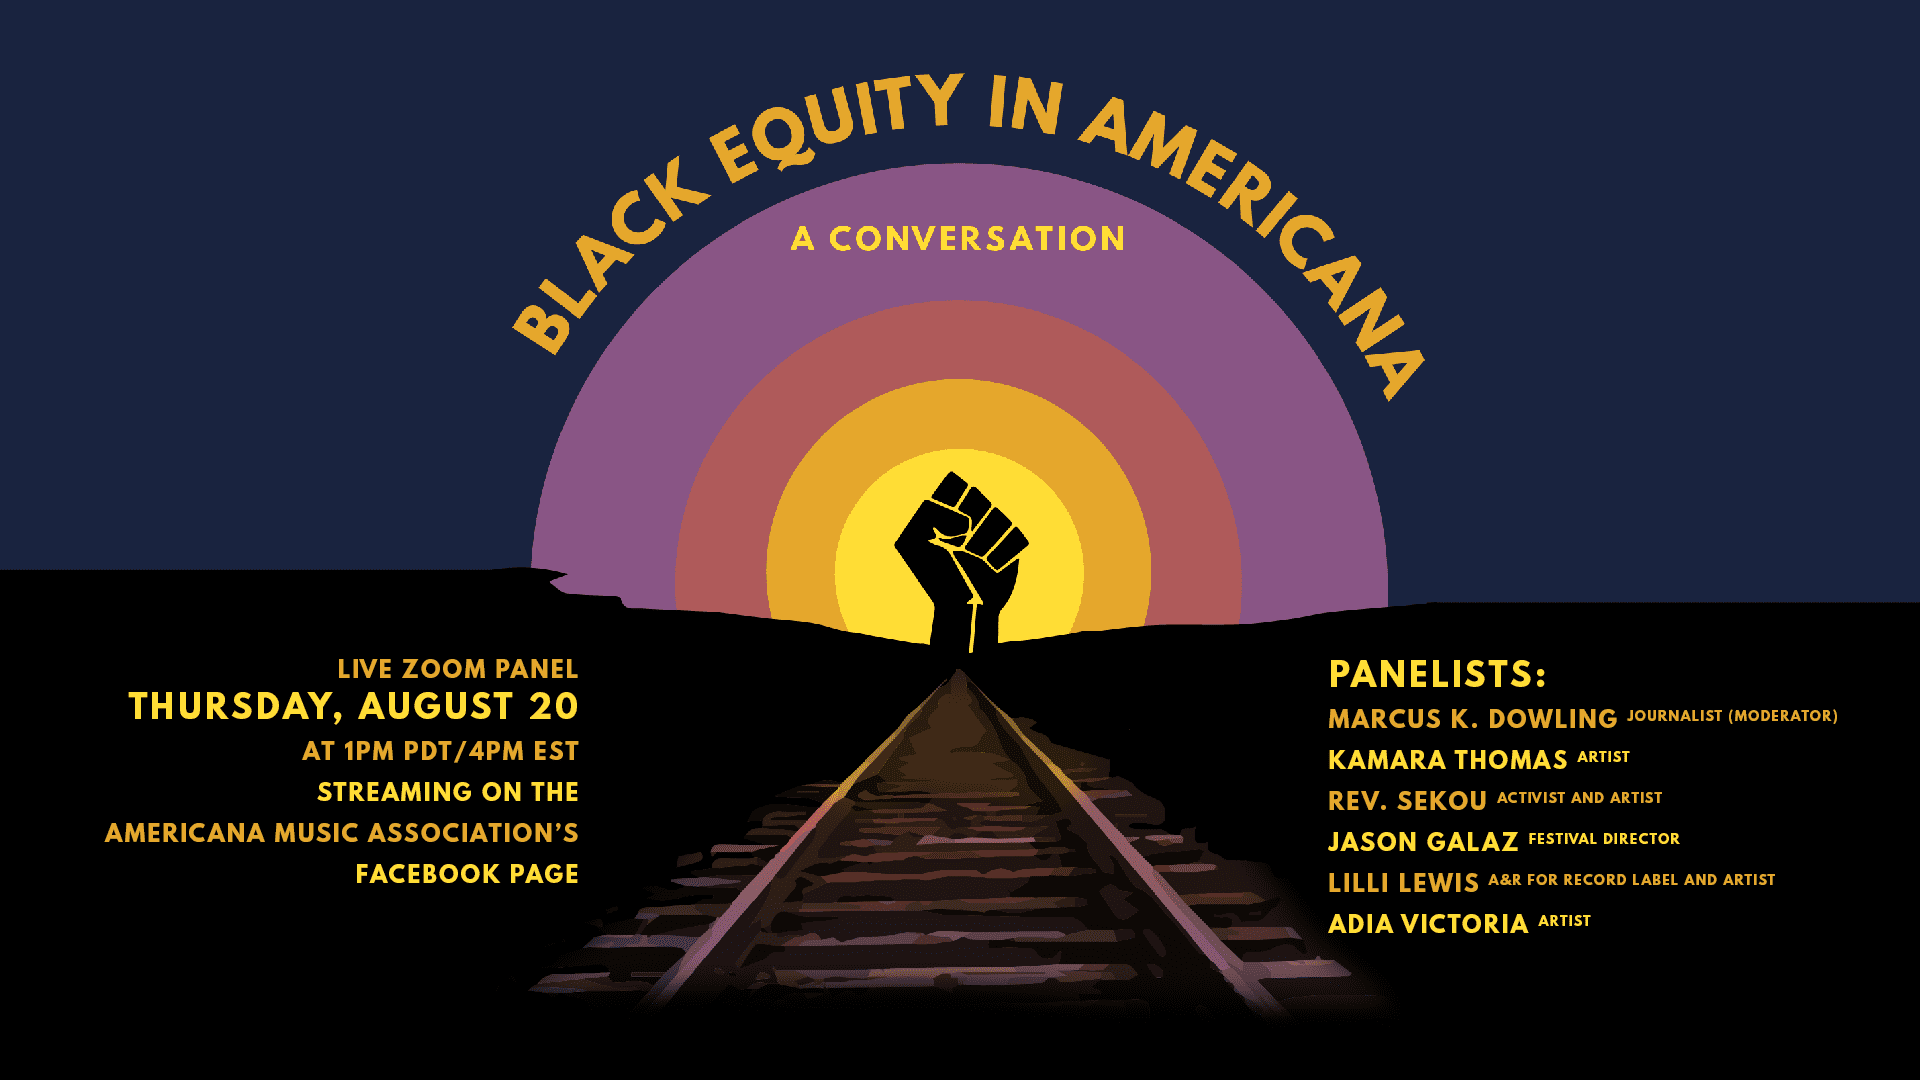 Americana Music Association to Host Online Panel on Black Equity in Americana